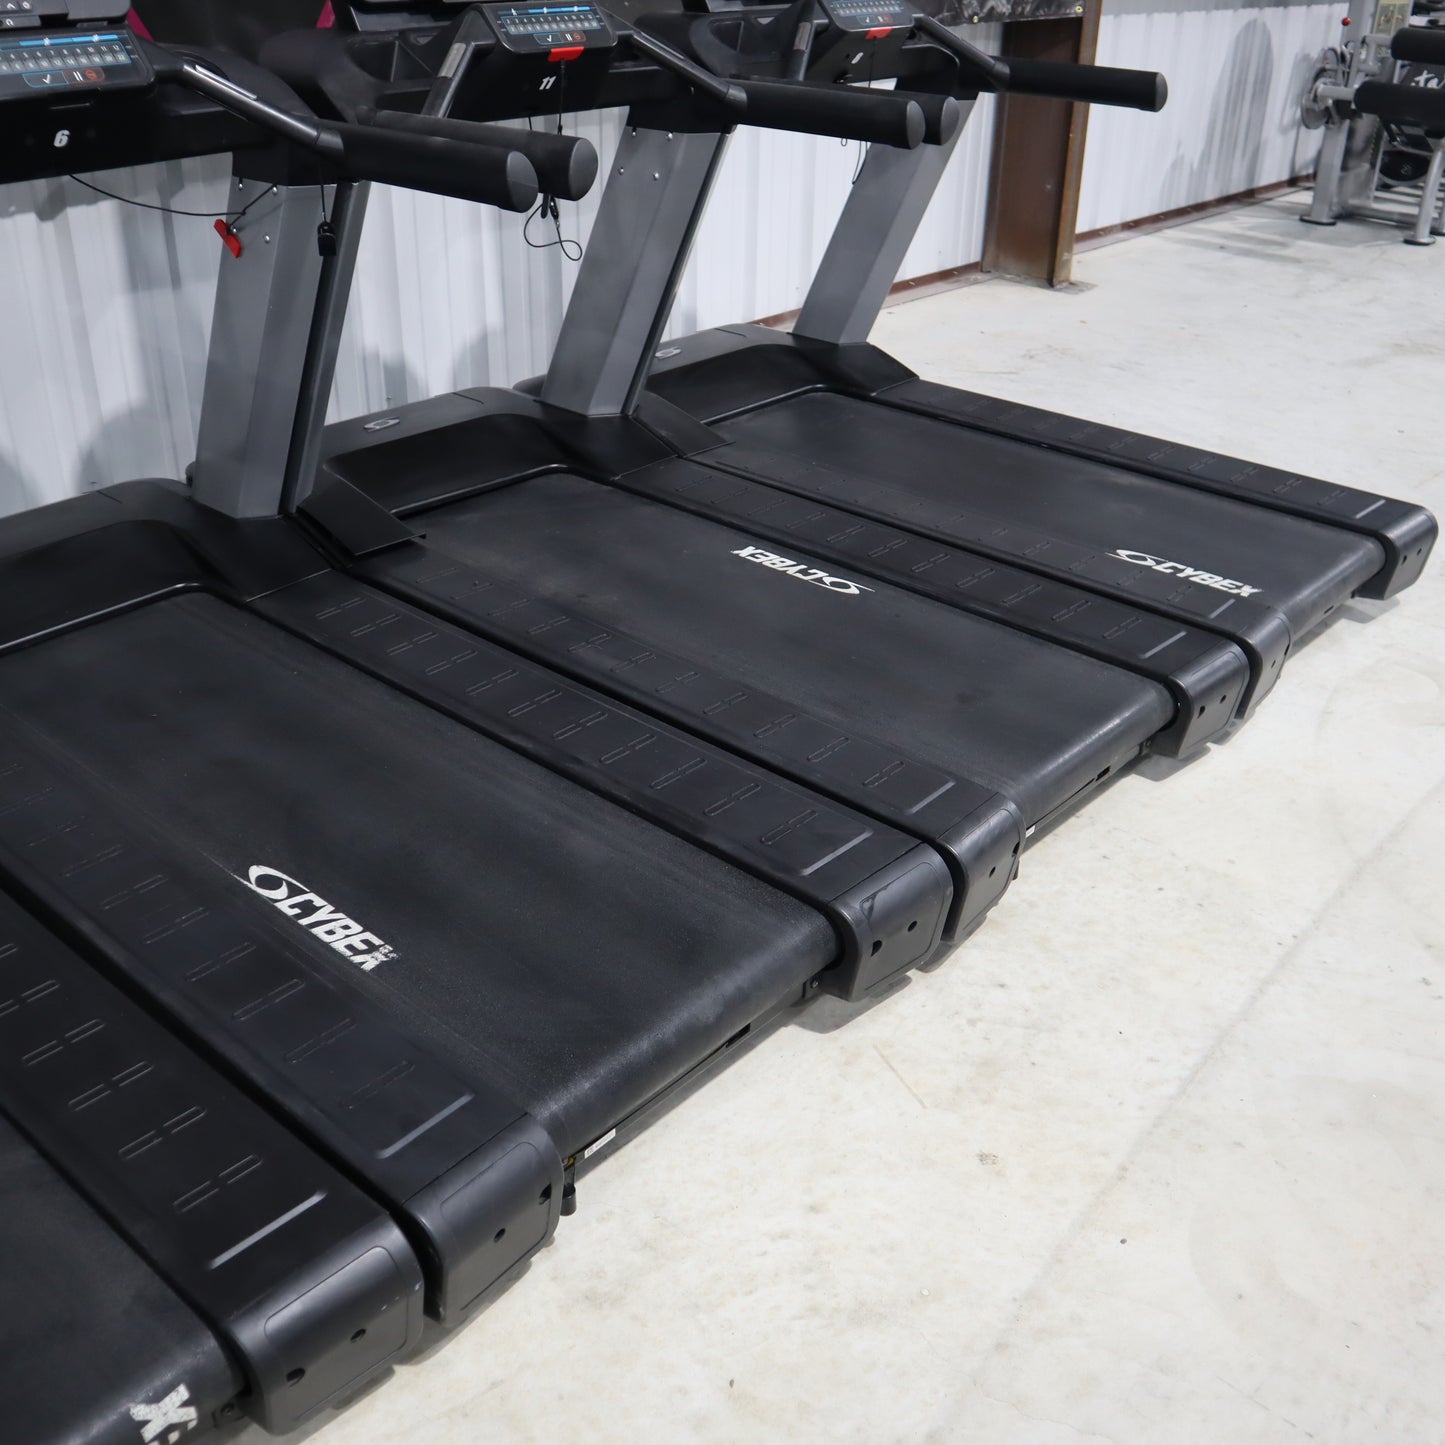 Cybex R Series w/ 50L Console Treadmill Package *4 Units* (Used)